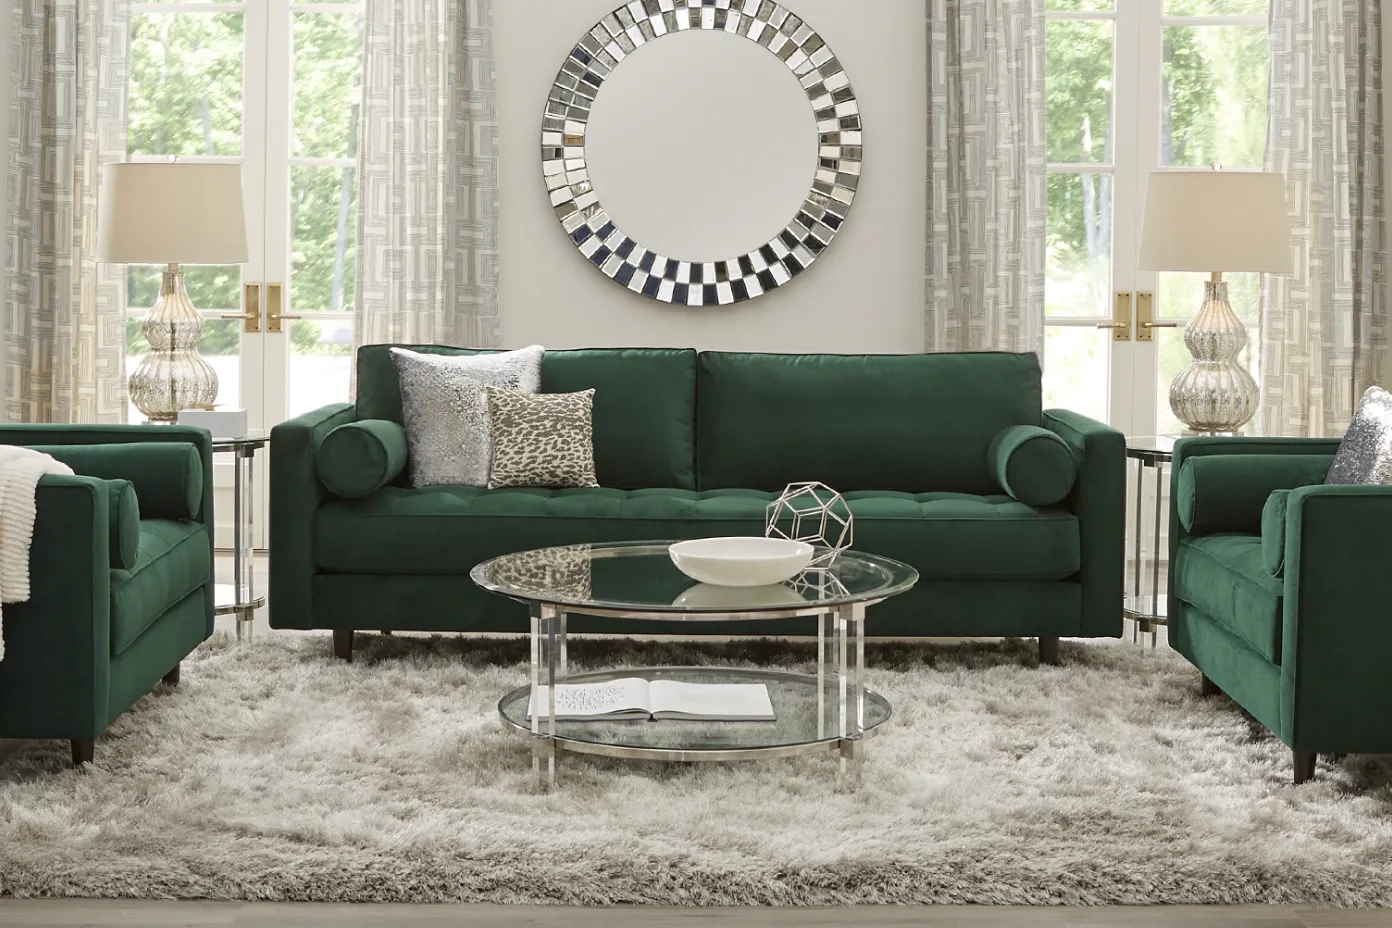 Decorating Your Home with Velvet Furniture